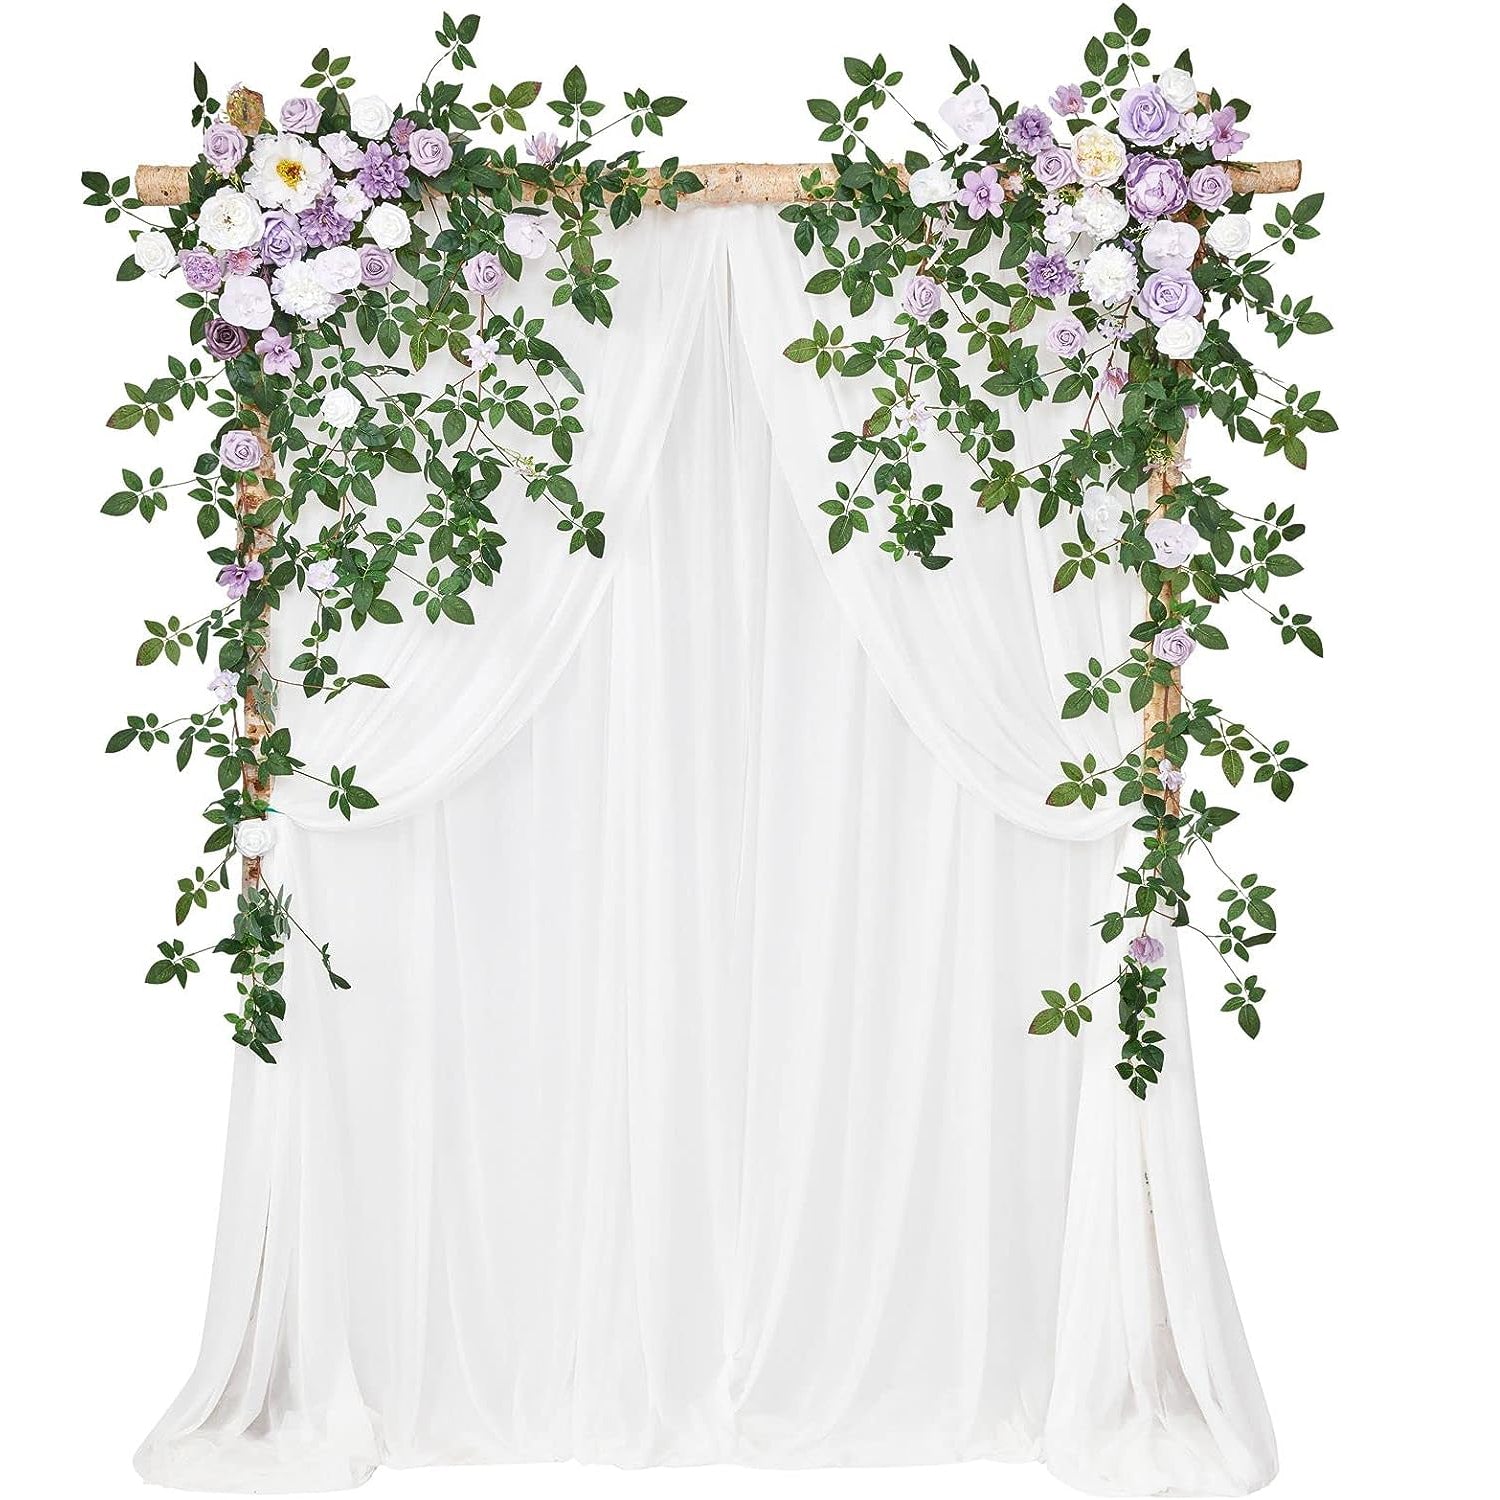 Y008: Wedding Arch Flowers with Two-Panel Drape(Pack of 4) Rose Morning